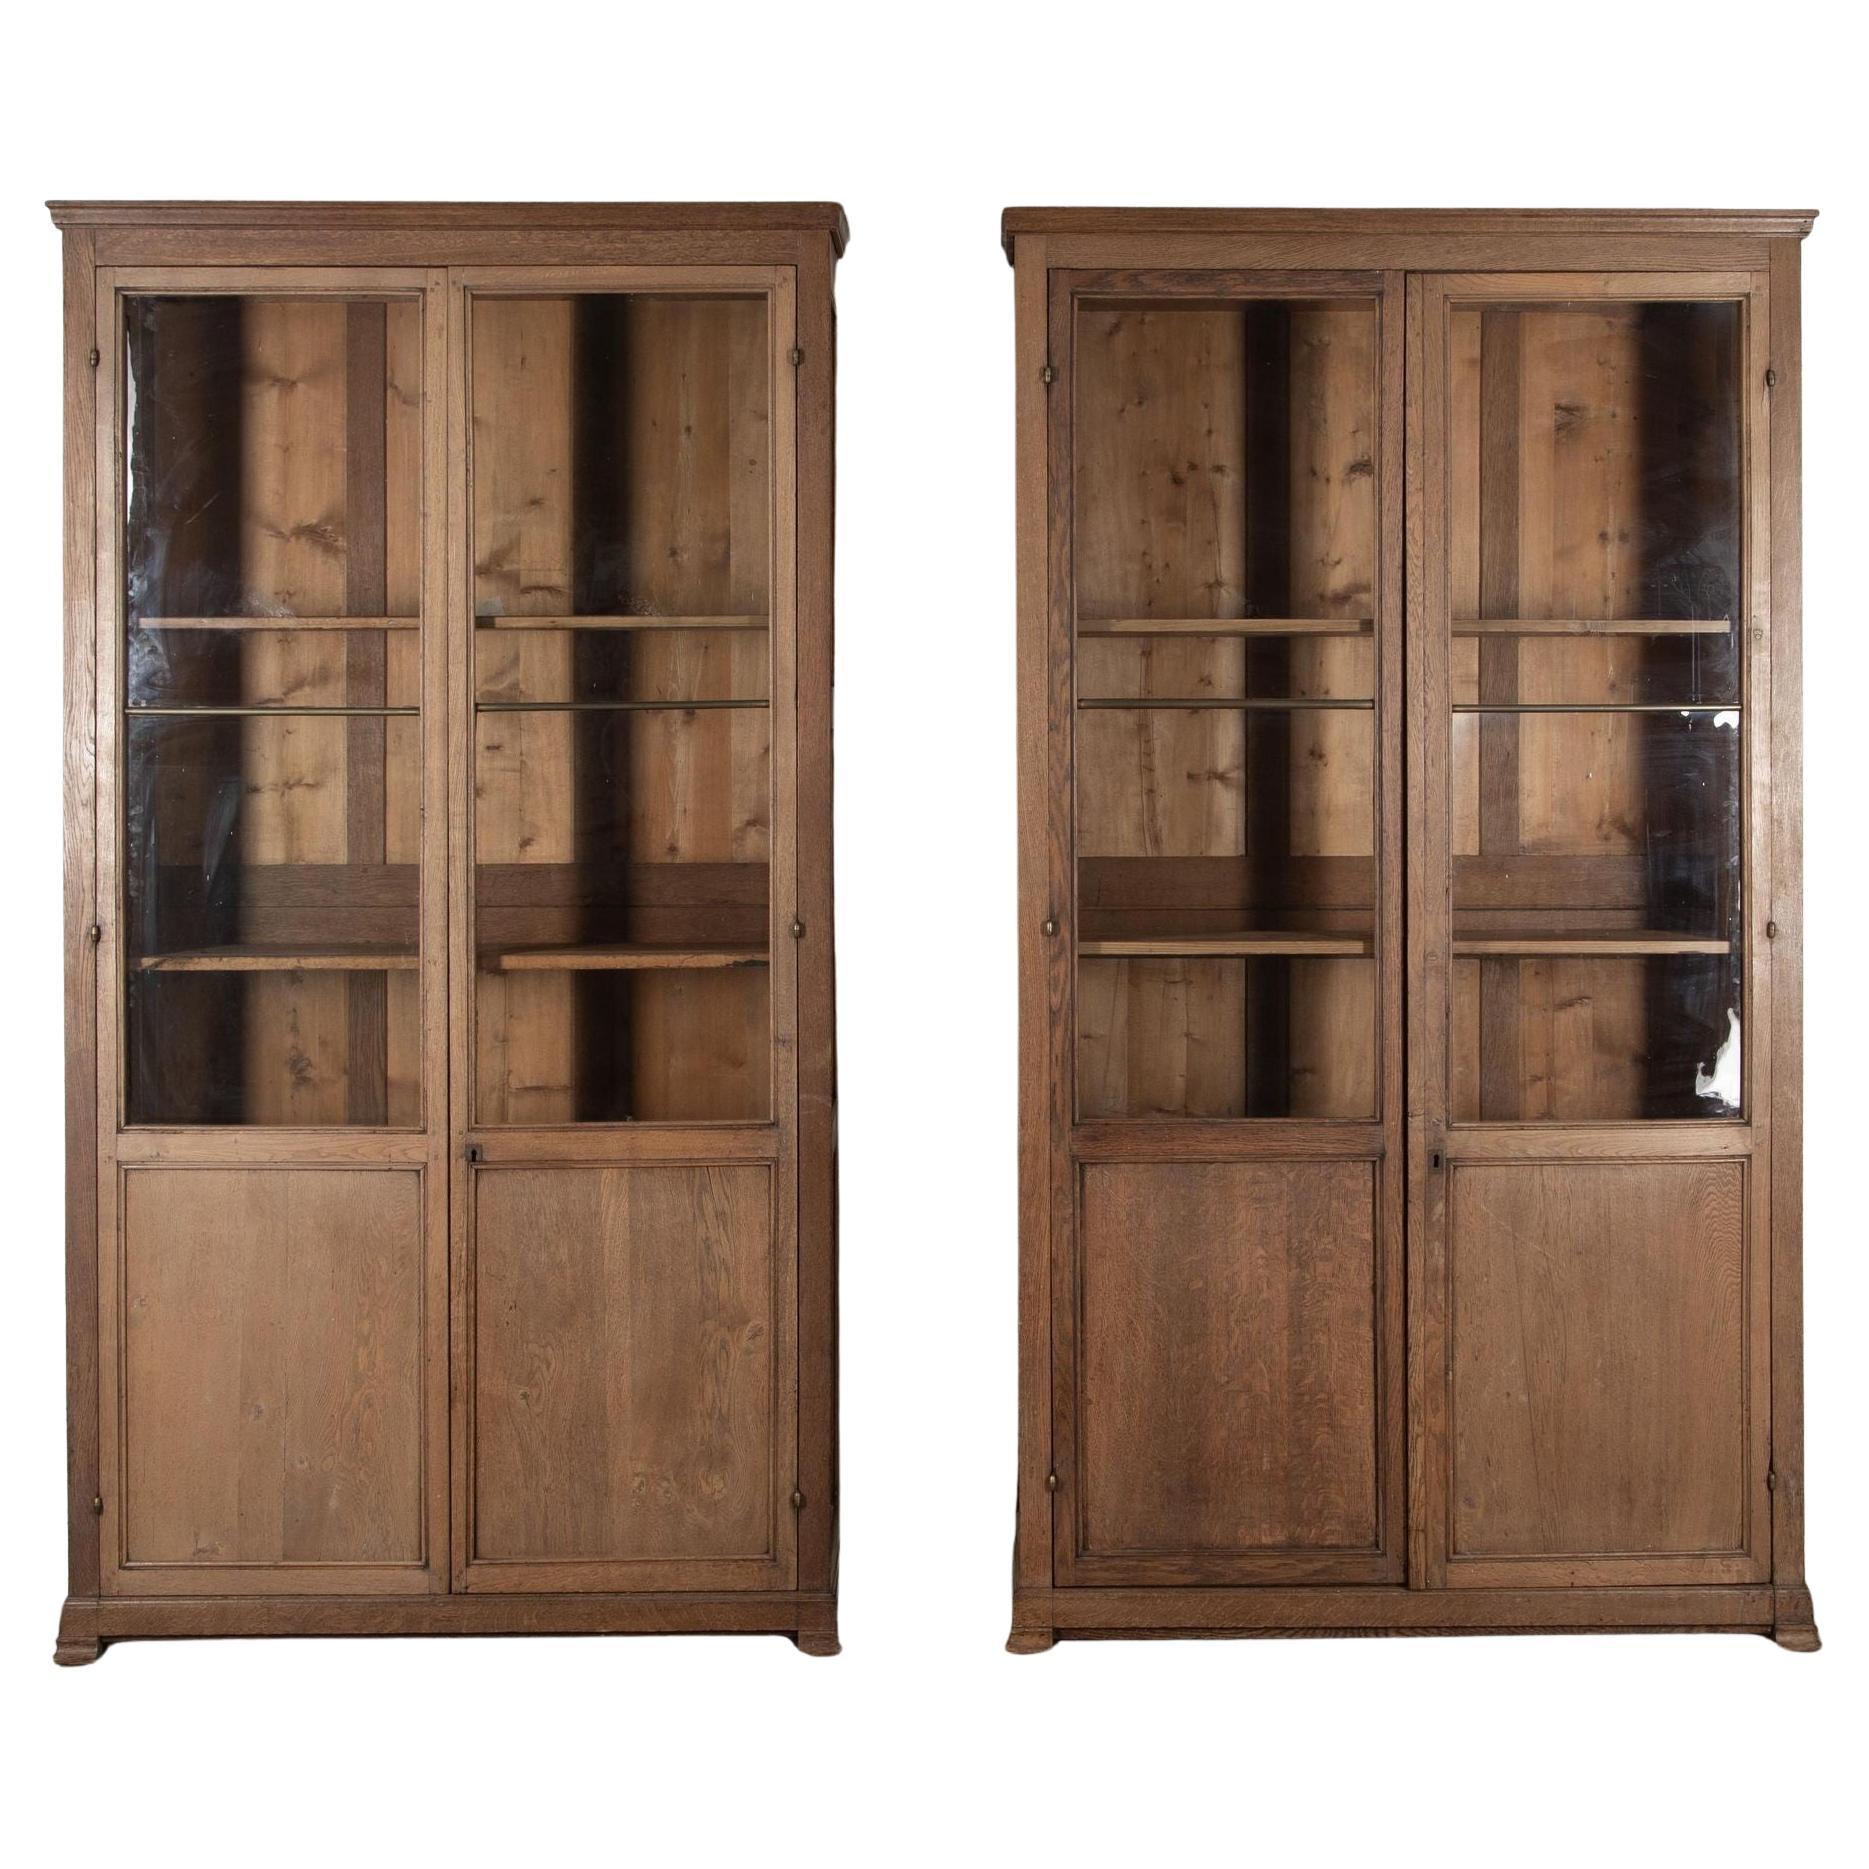 Pair of 19th Century Tall Oak Bookcases